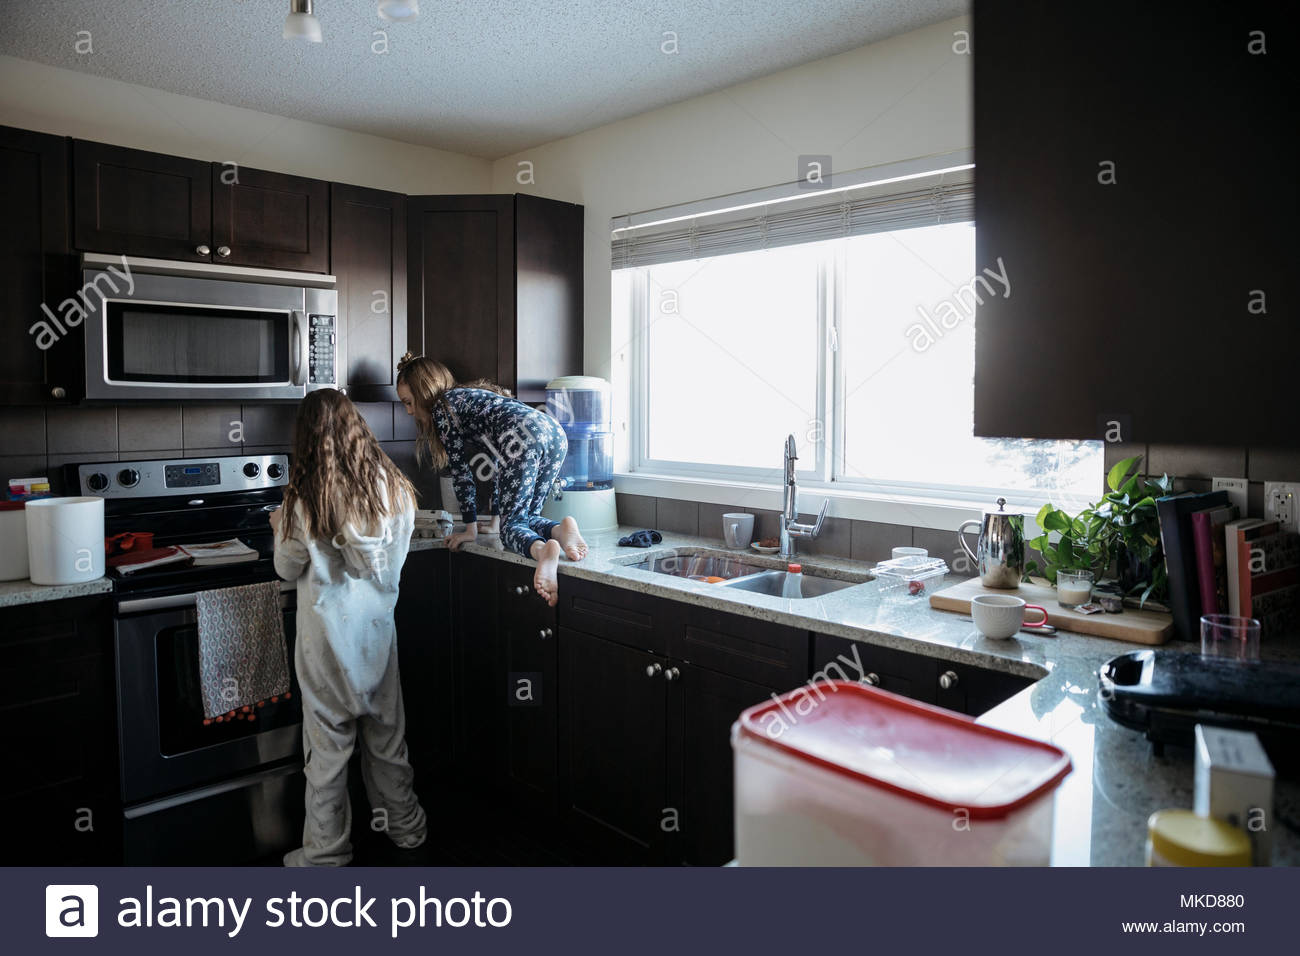 Sisters in pajamas in kitchen Stock Photo